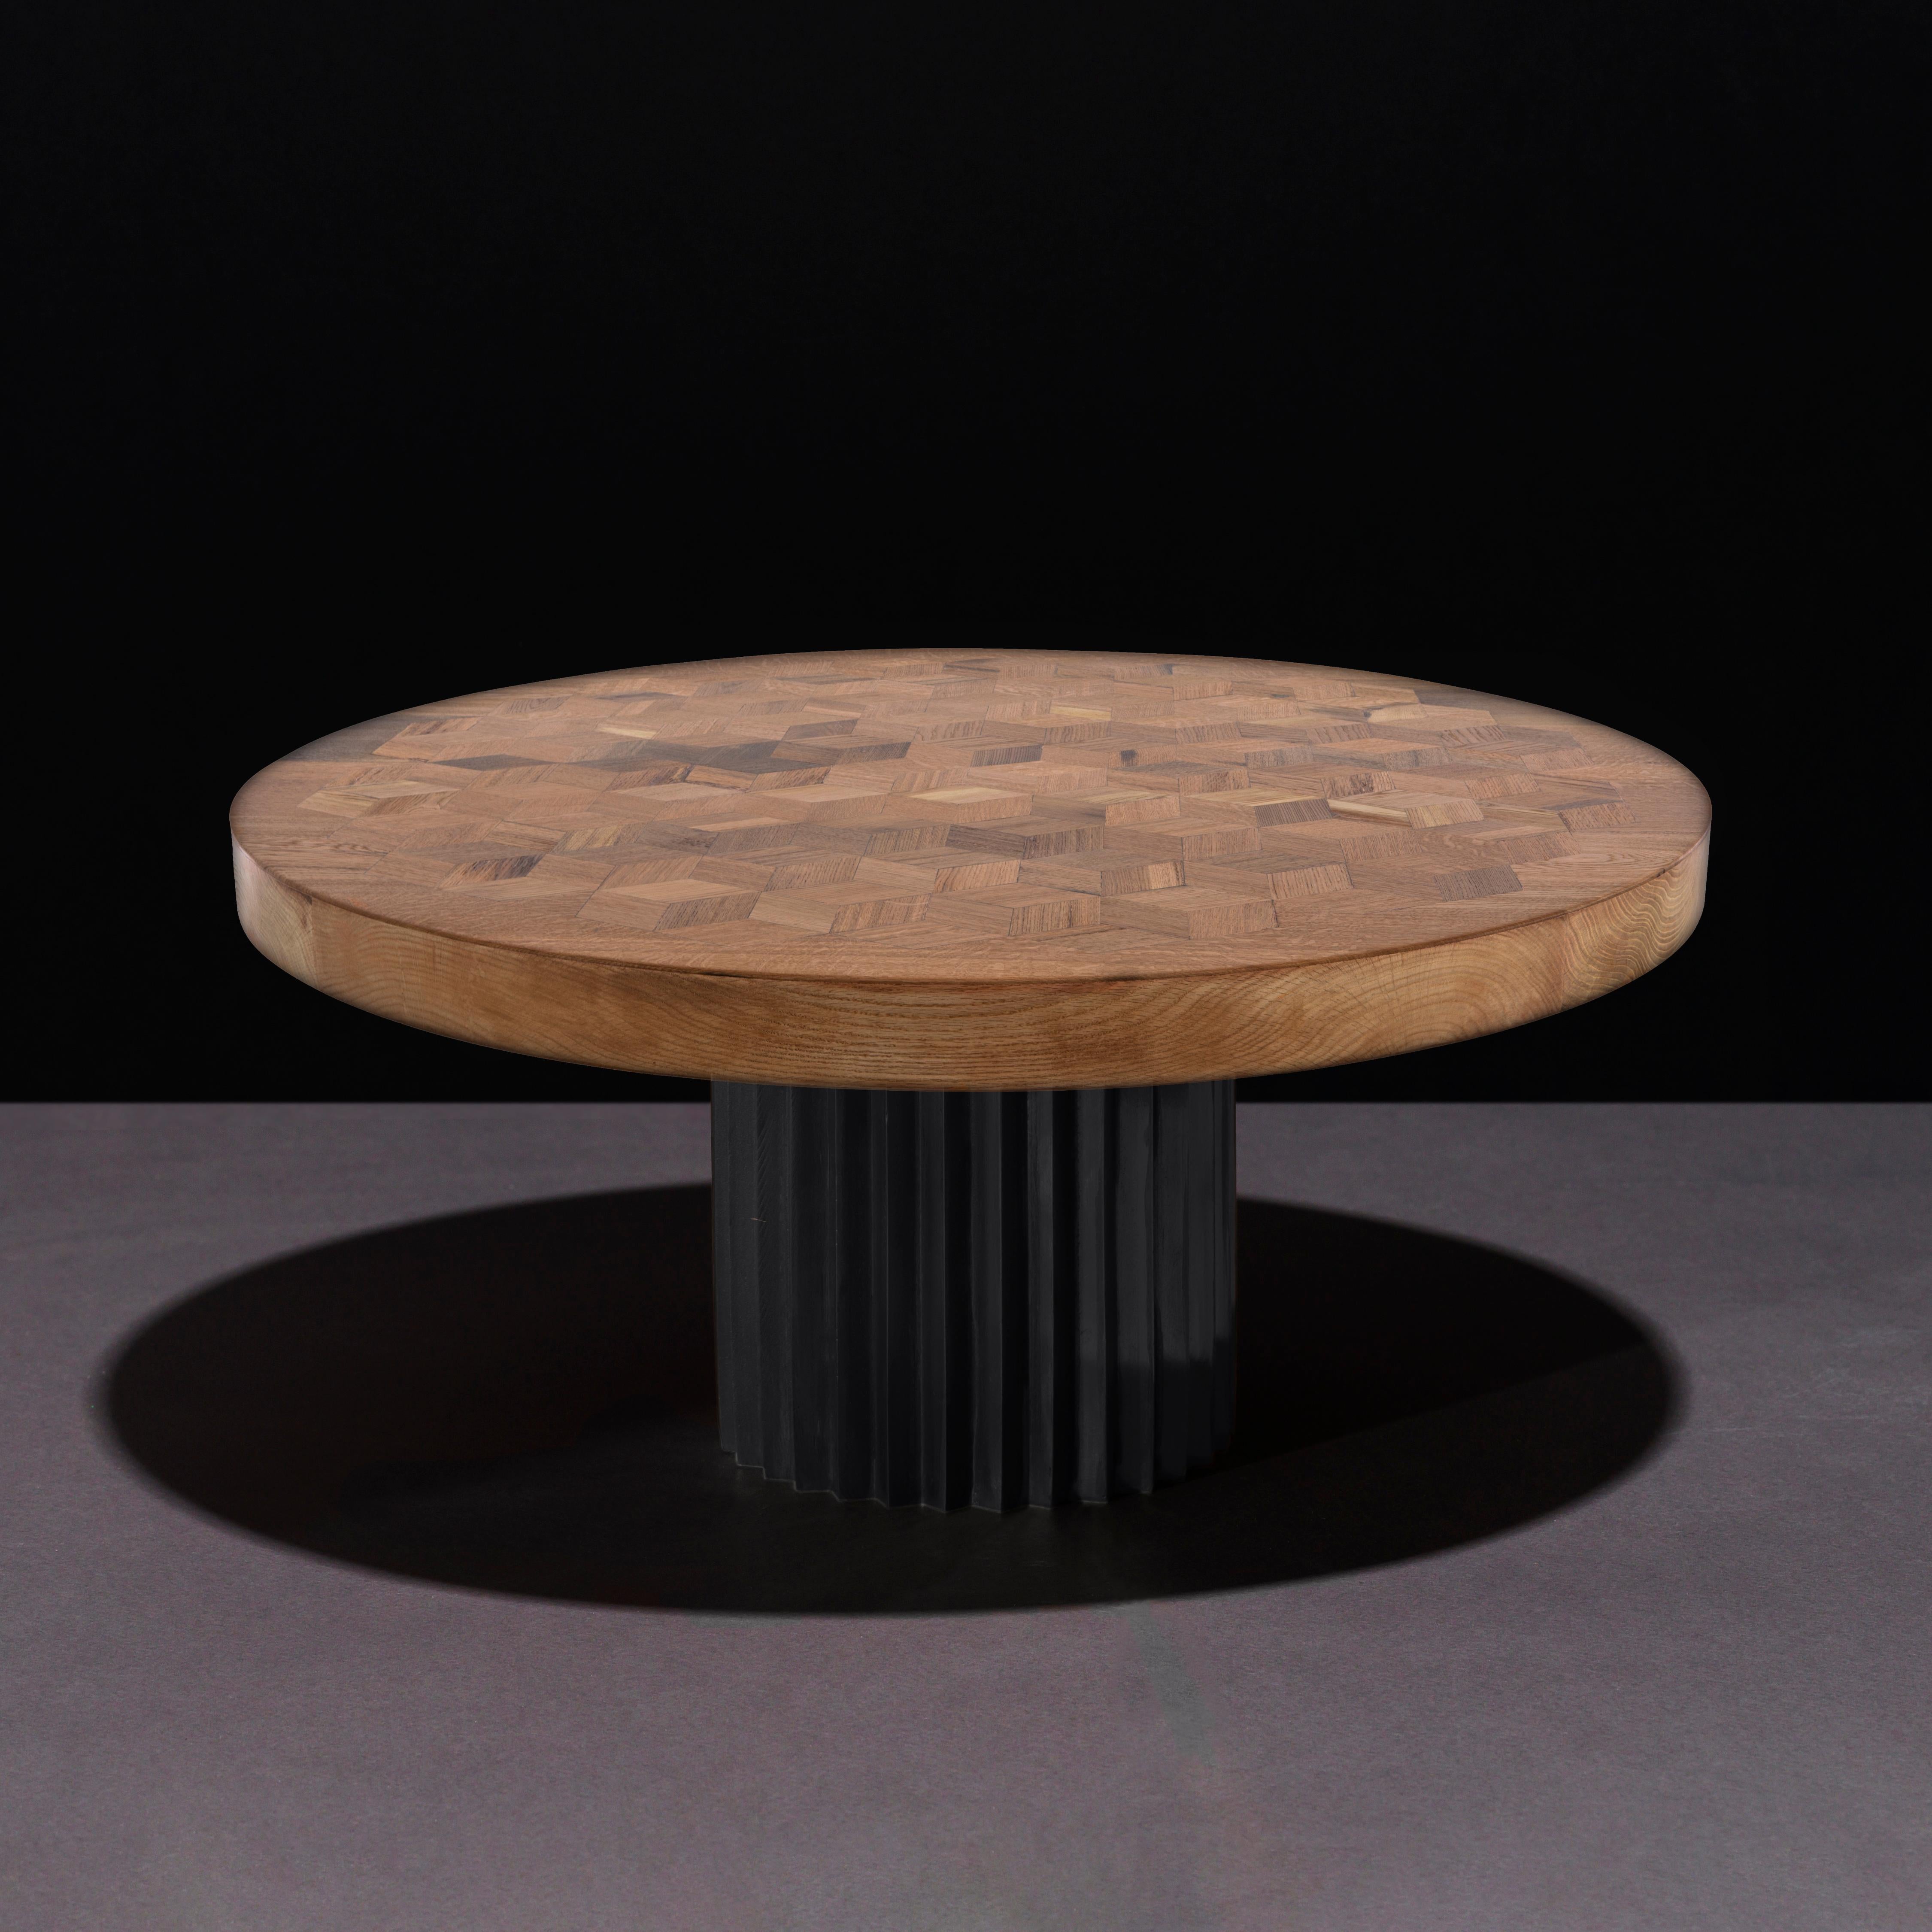 Doris Reclaimed Oak Round Dining Table by Fred and Juul
Dimensions: Ø 160 x H 74 cm.
Materials: Black patinated bronze and reclaimed oak.

Available in round, oval and rectangular shapes. Also available in different materials. Custom sizes,